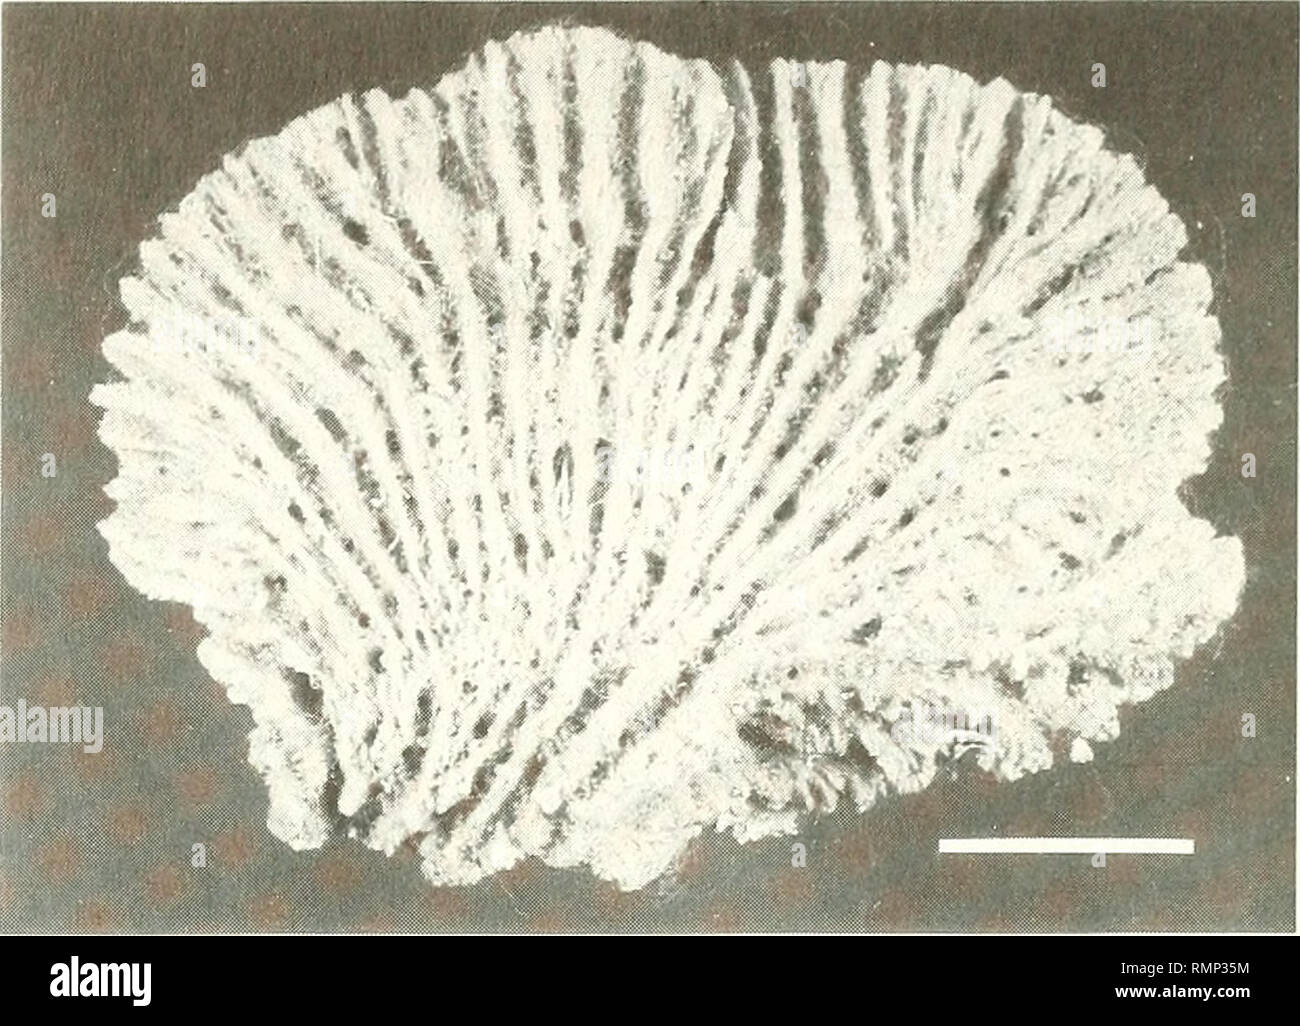 . Annali del Museo civico di storia naturale Giacomo Doria. Natural history. 308 G. PULITZER-FINALI. Fig. 39 - Aulospongus flabellum sp. n., the holotype (dry). Scale: 2 cm. Aulospongus flabellum sp.n. (Fig. 38, 39) Occurrence: North Kenya Banks (02&quot;23'S - 41°04'E), depth 110-170 m, dredge, 17 June 1971. R.N. KEN.4, KEN.42. Holotype (KEN.42): msng 48305. Paratype (KEN.4): msng 48306. The two specimens are flabellate, 4.5 and 5.5 cm high respectively, about 4 mm thick, microscopically hispid. One surface bears very regular ridges running from the base toward the border; the ridges on the o Stock Photo